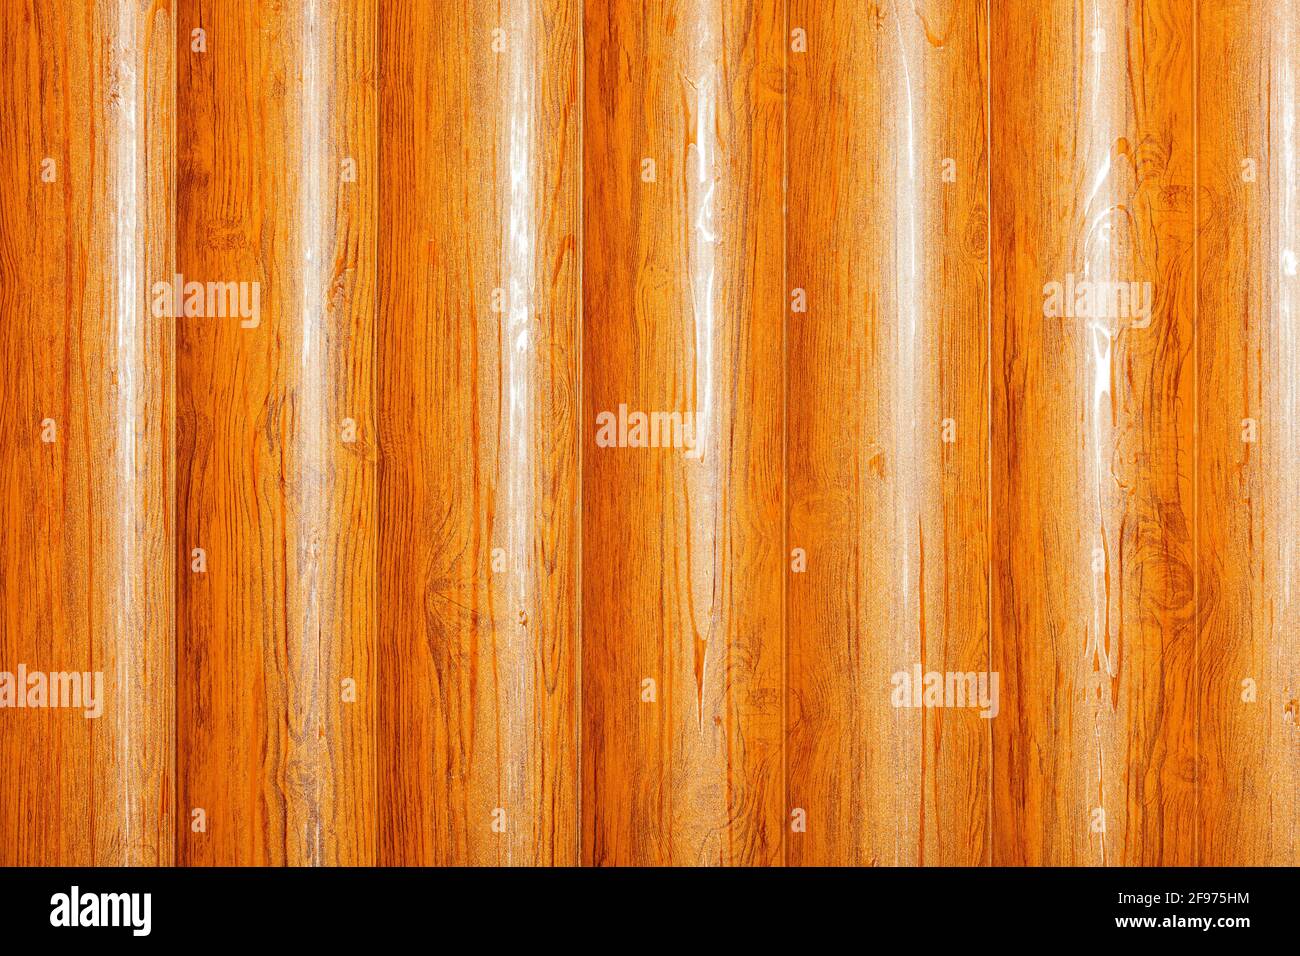 The texture of a row of logs, upright, orange-lacquered wooden trunks pressed tightly against each other, with direct overhead lighting. Stock Photo